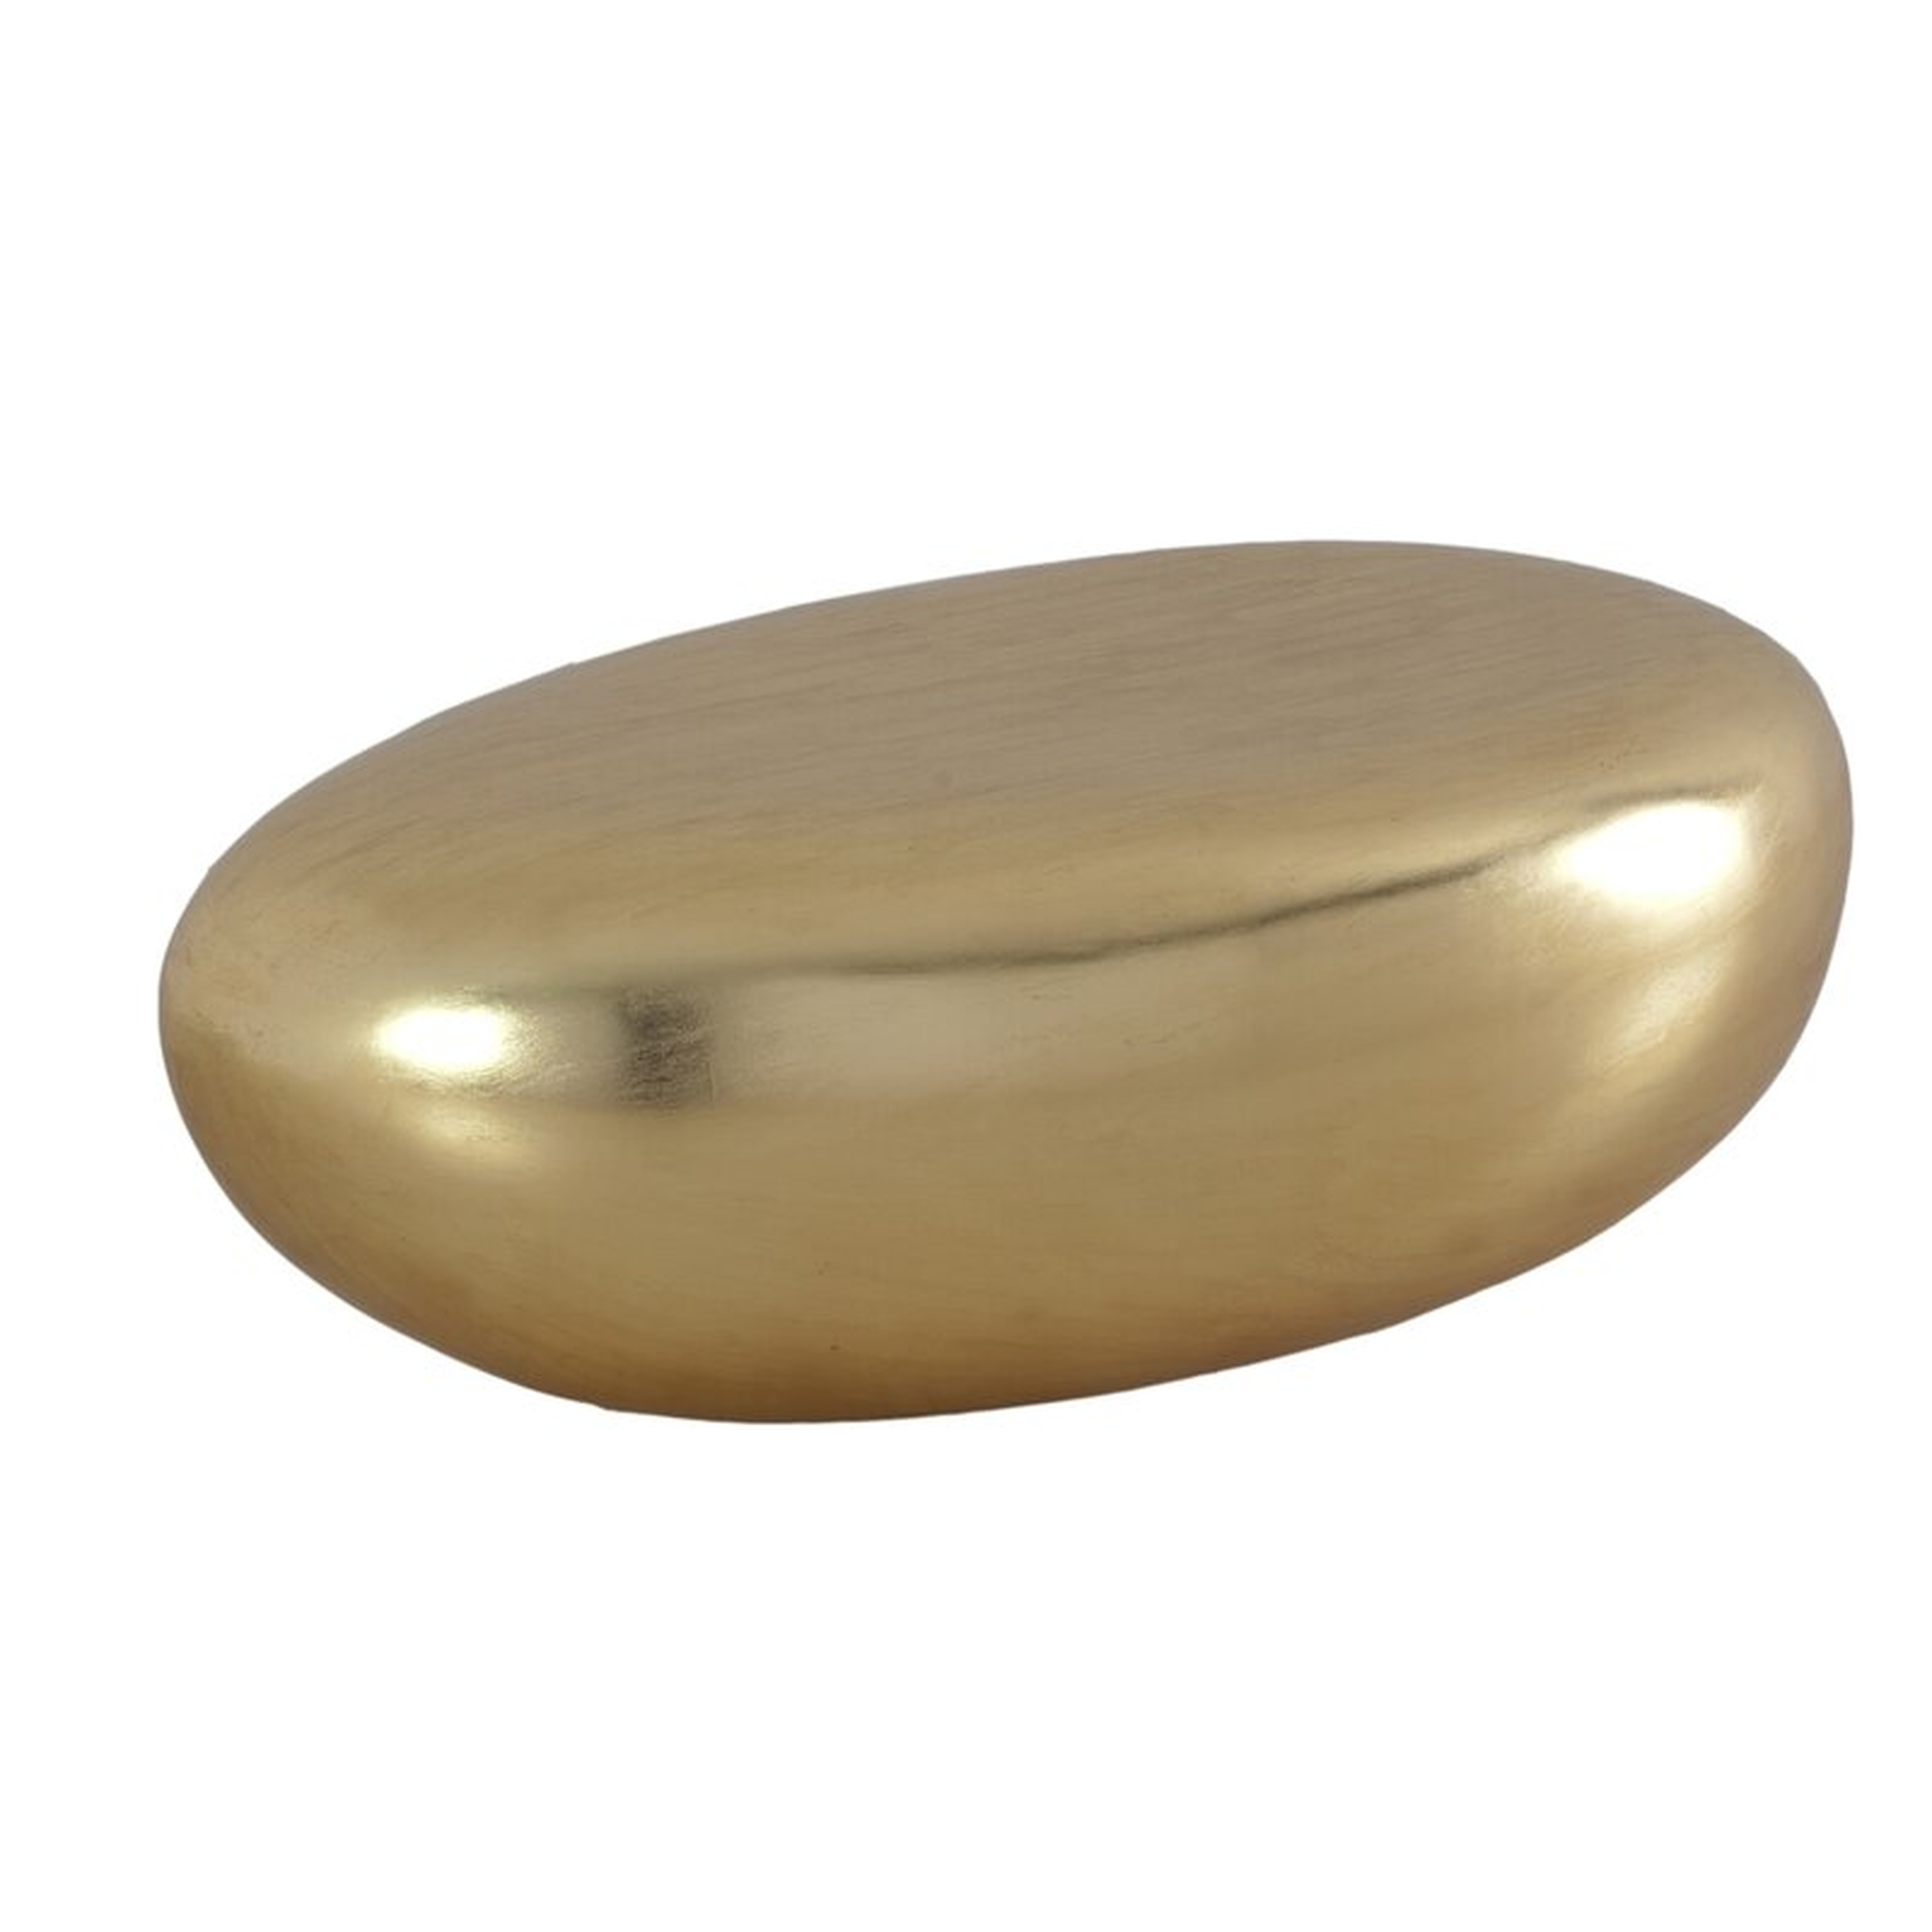 Phillips Collection River Stone Abstract Coffee Table Size: 16" H x 54" L x 34" W, Color: Gold Leaf - Perigold